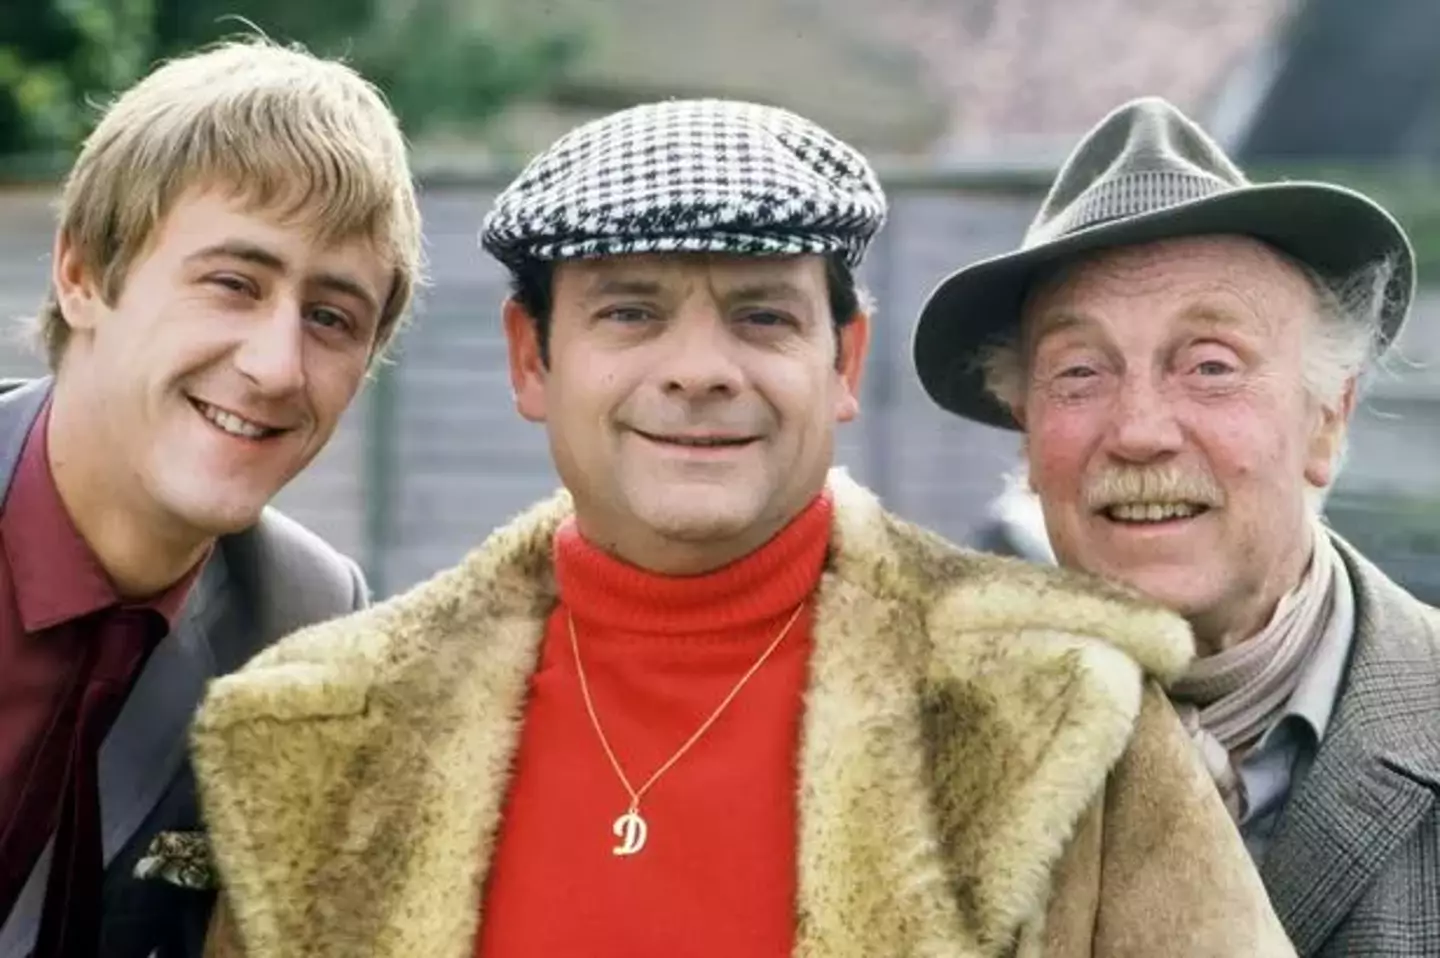 Yes, the show that Hurley auditioned for was Only Fools and Horses. (BBC)